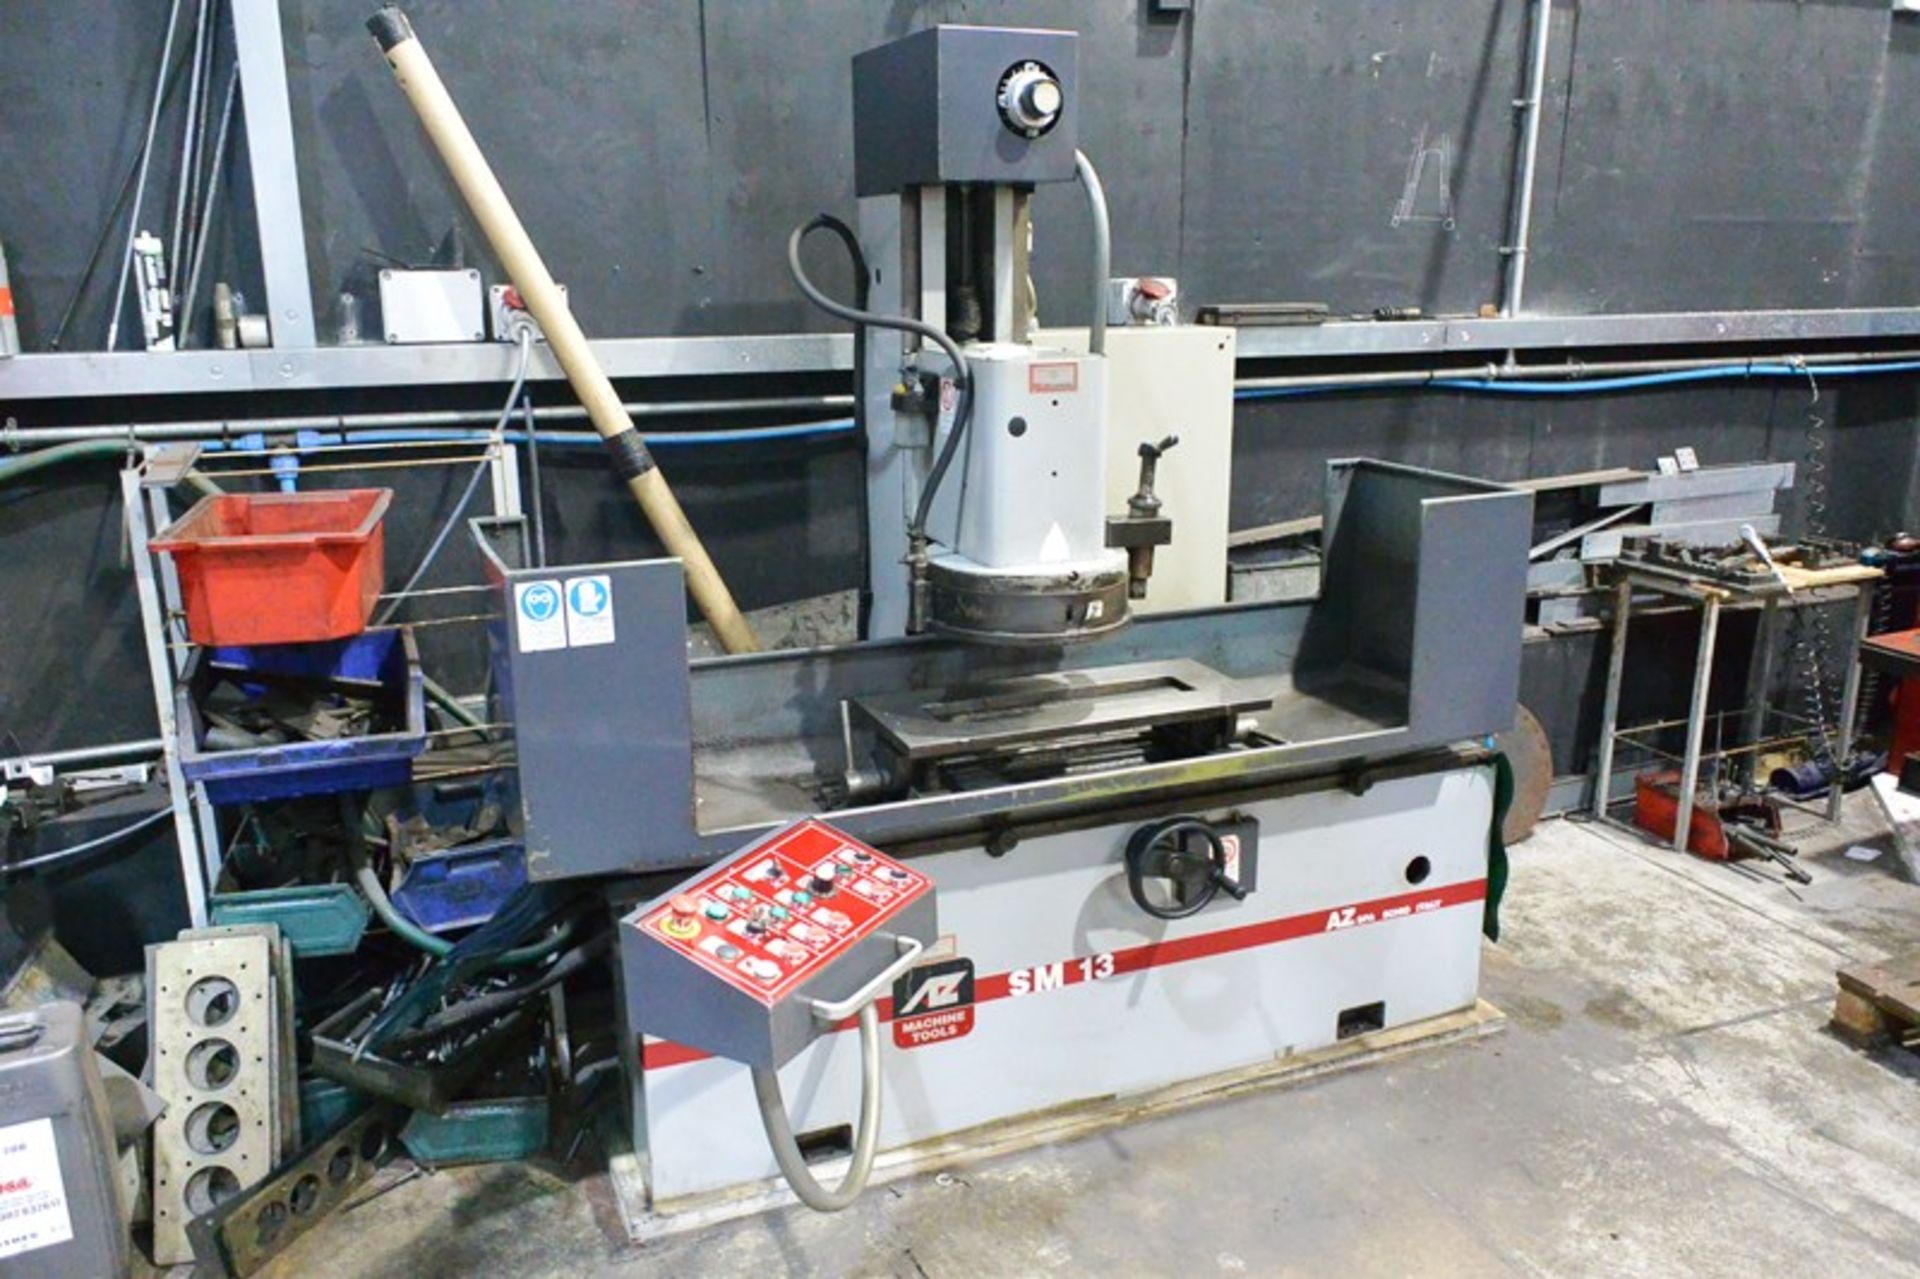 AZ SPA SM13 vertical spindle surface grinding machine, serial no. 1404 (2000) Max table traverse: - Image 7 of 8